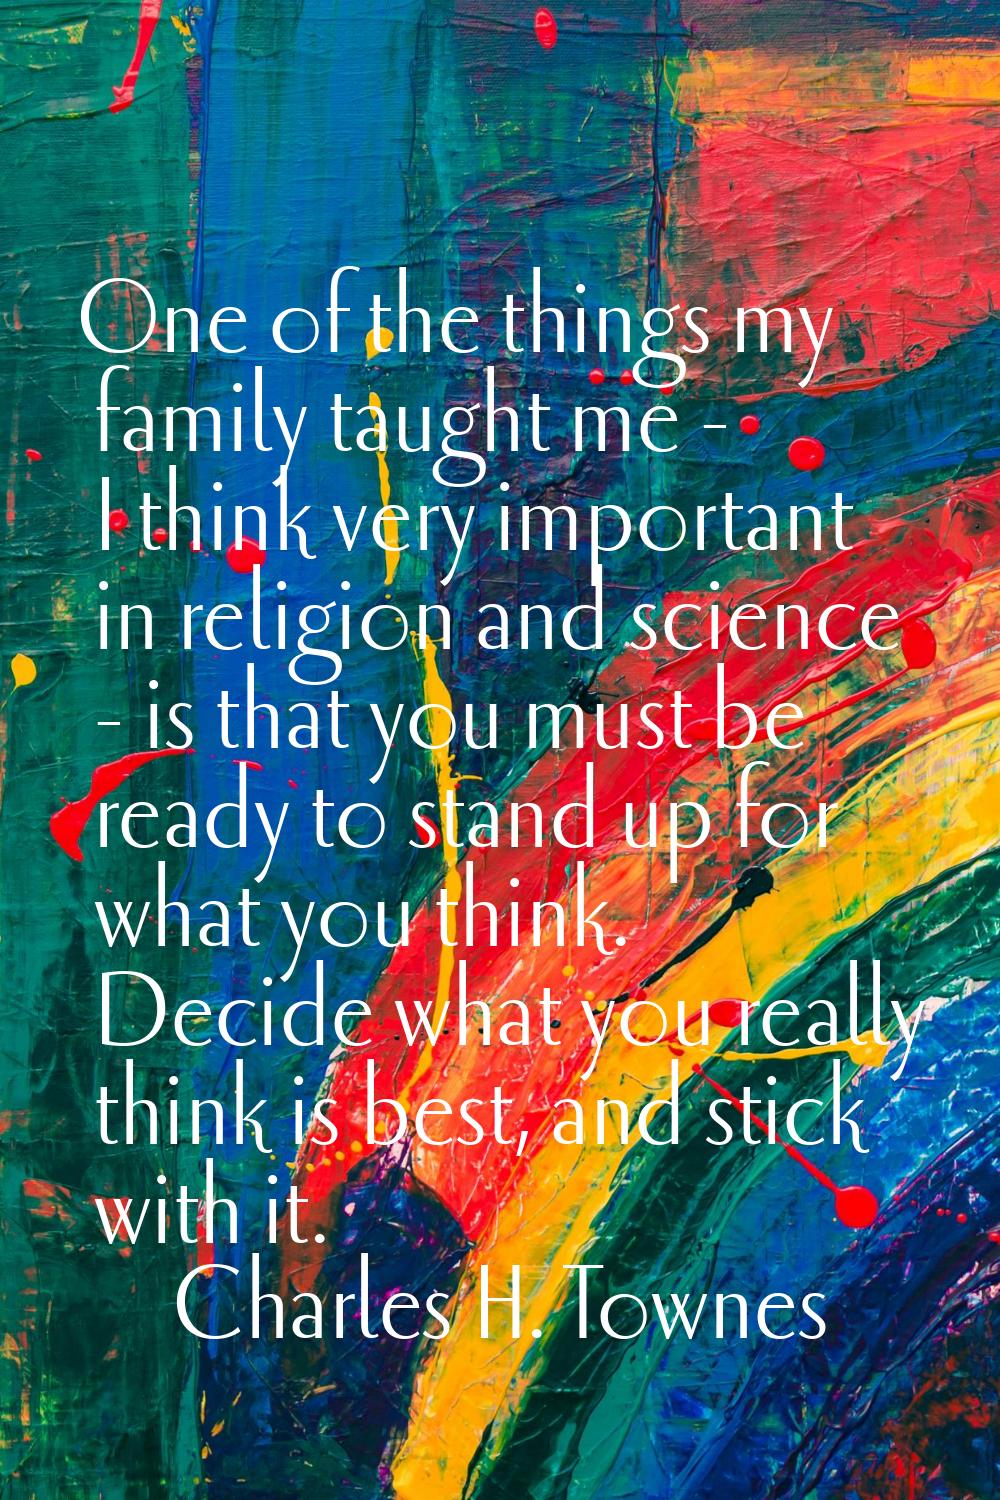 One of the things my family taught me - I think very important in religion and science - is that yo